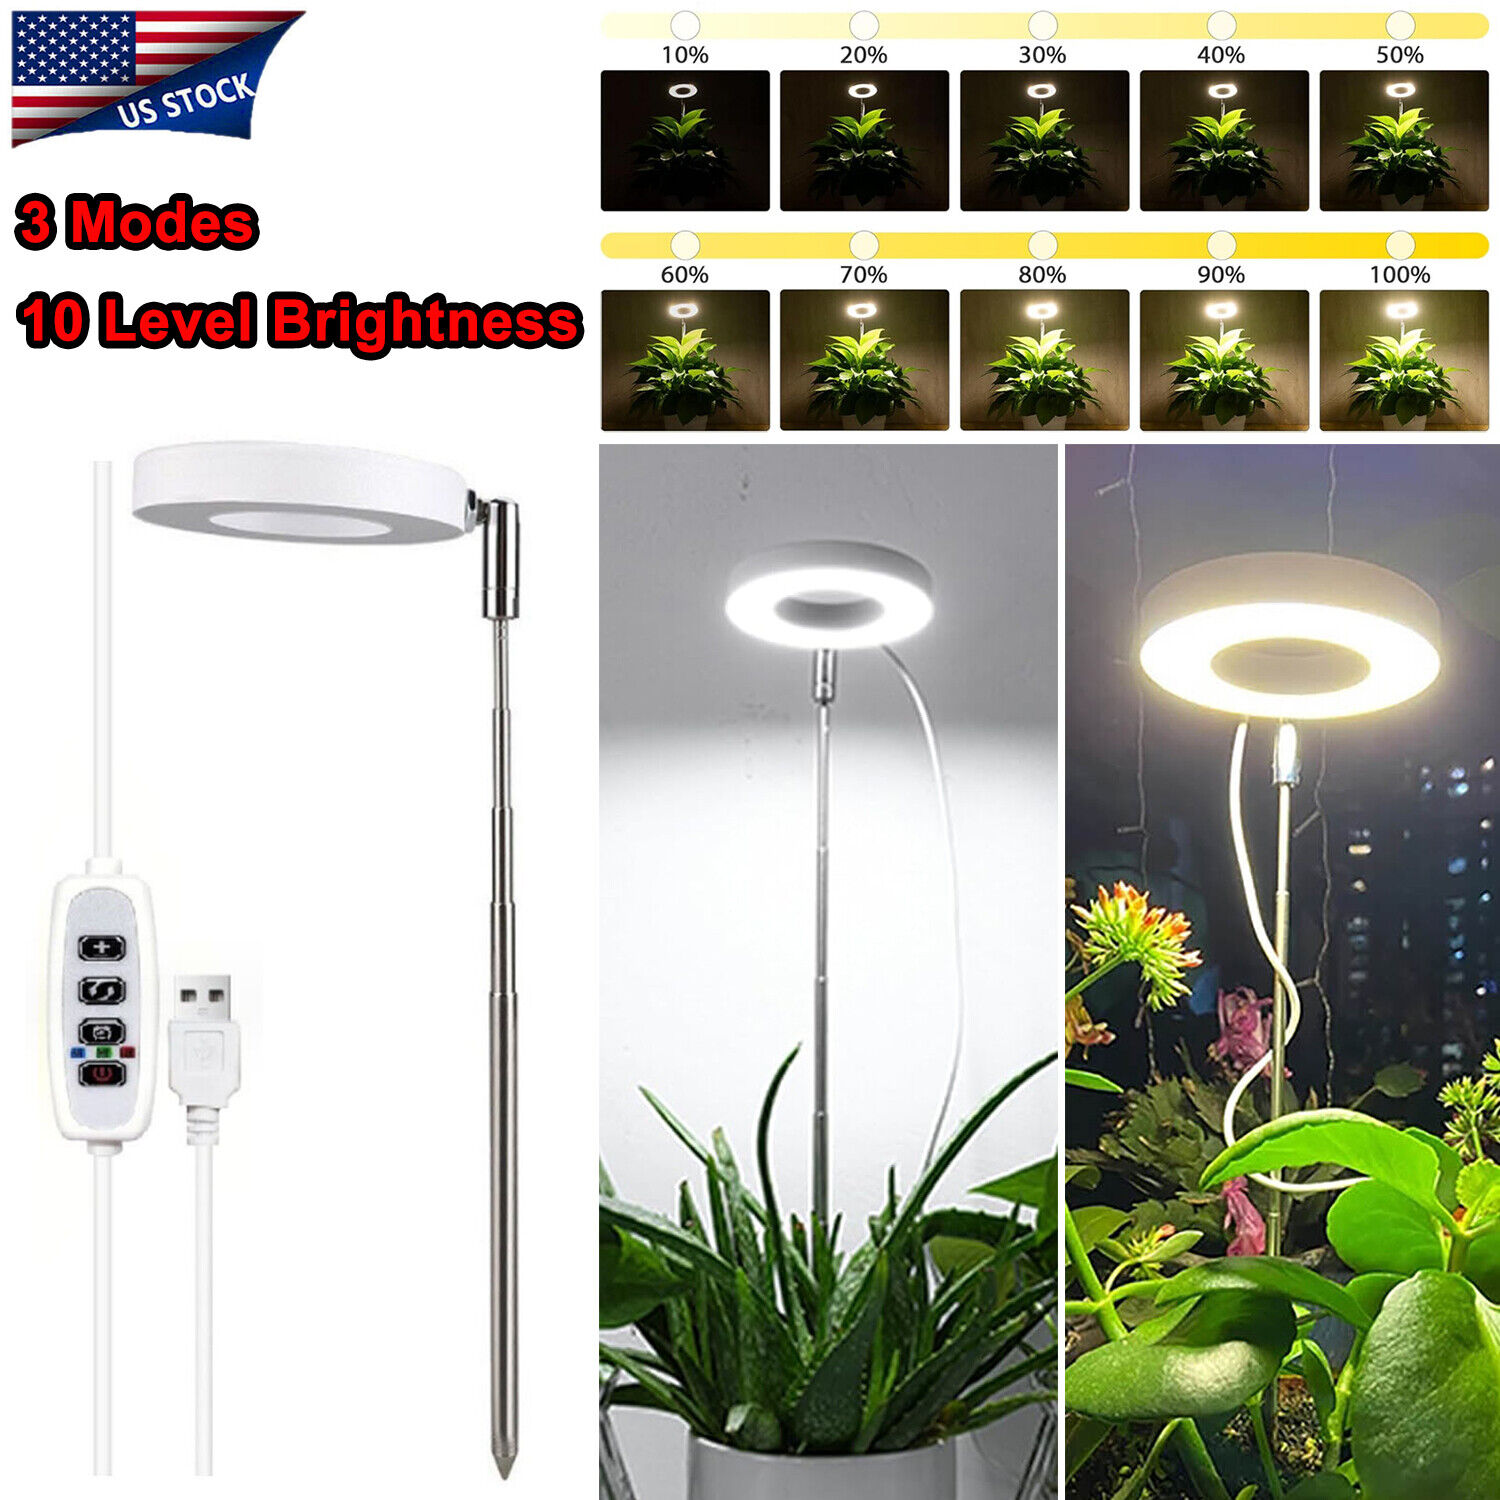 48 LED Grow Light Plant Growing Lamp Lights with Timer for Indoor Flower Plants